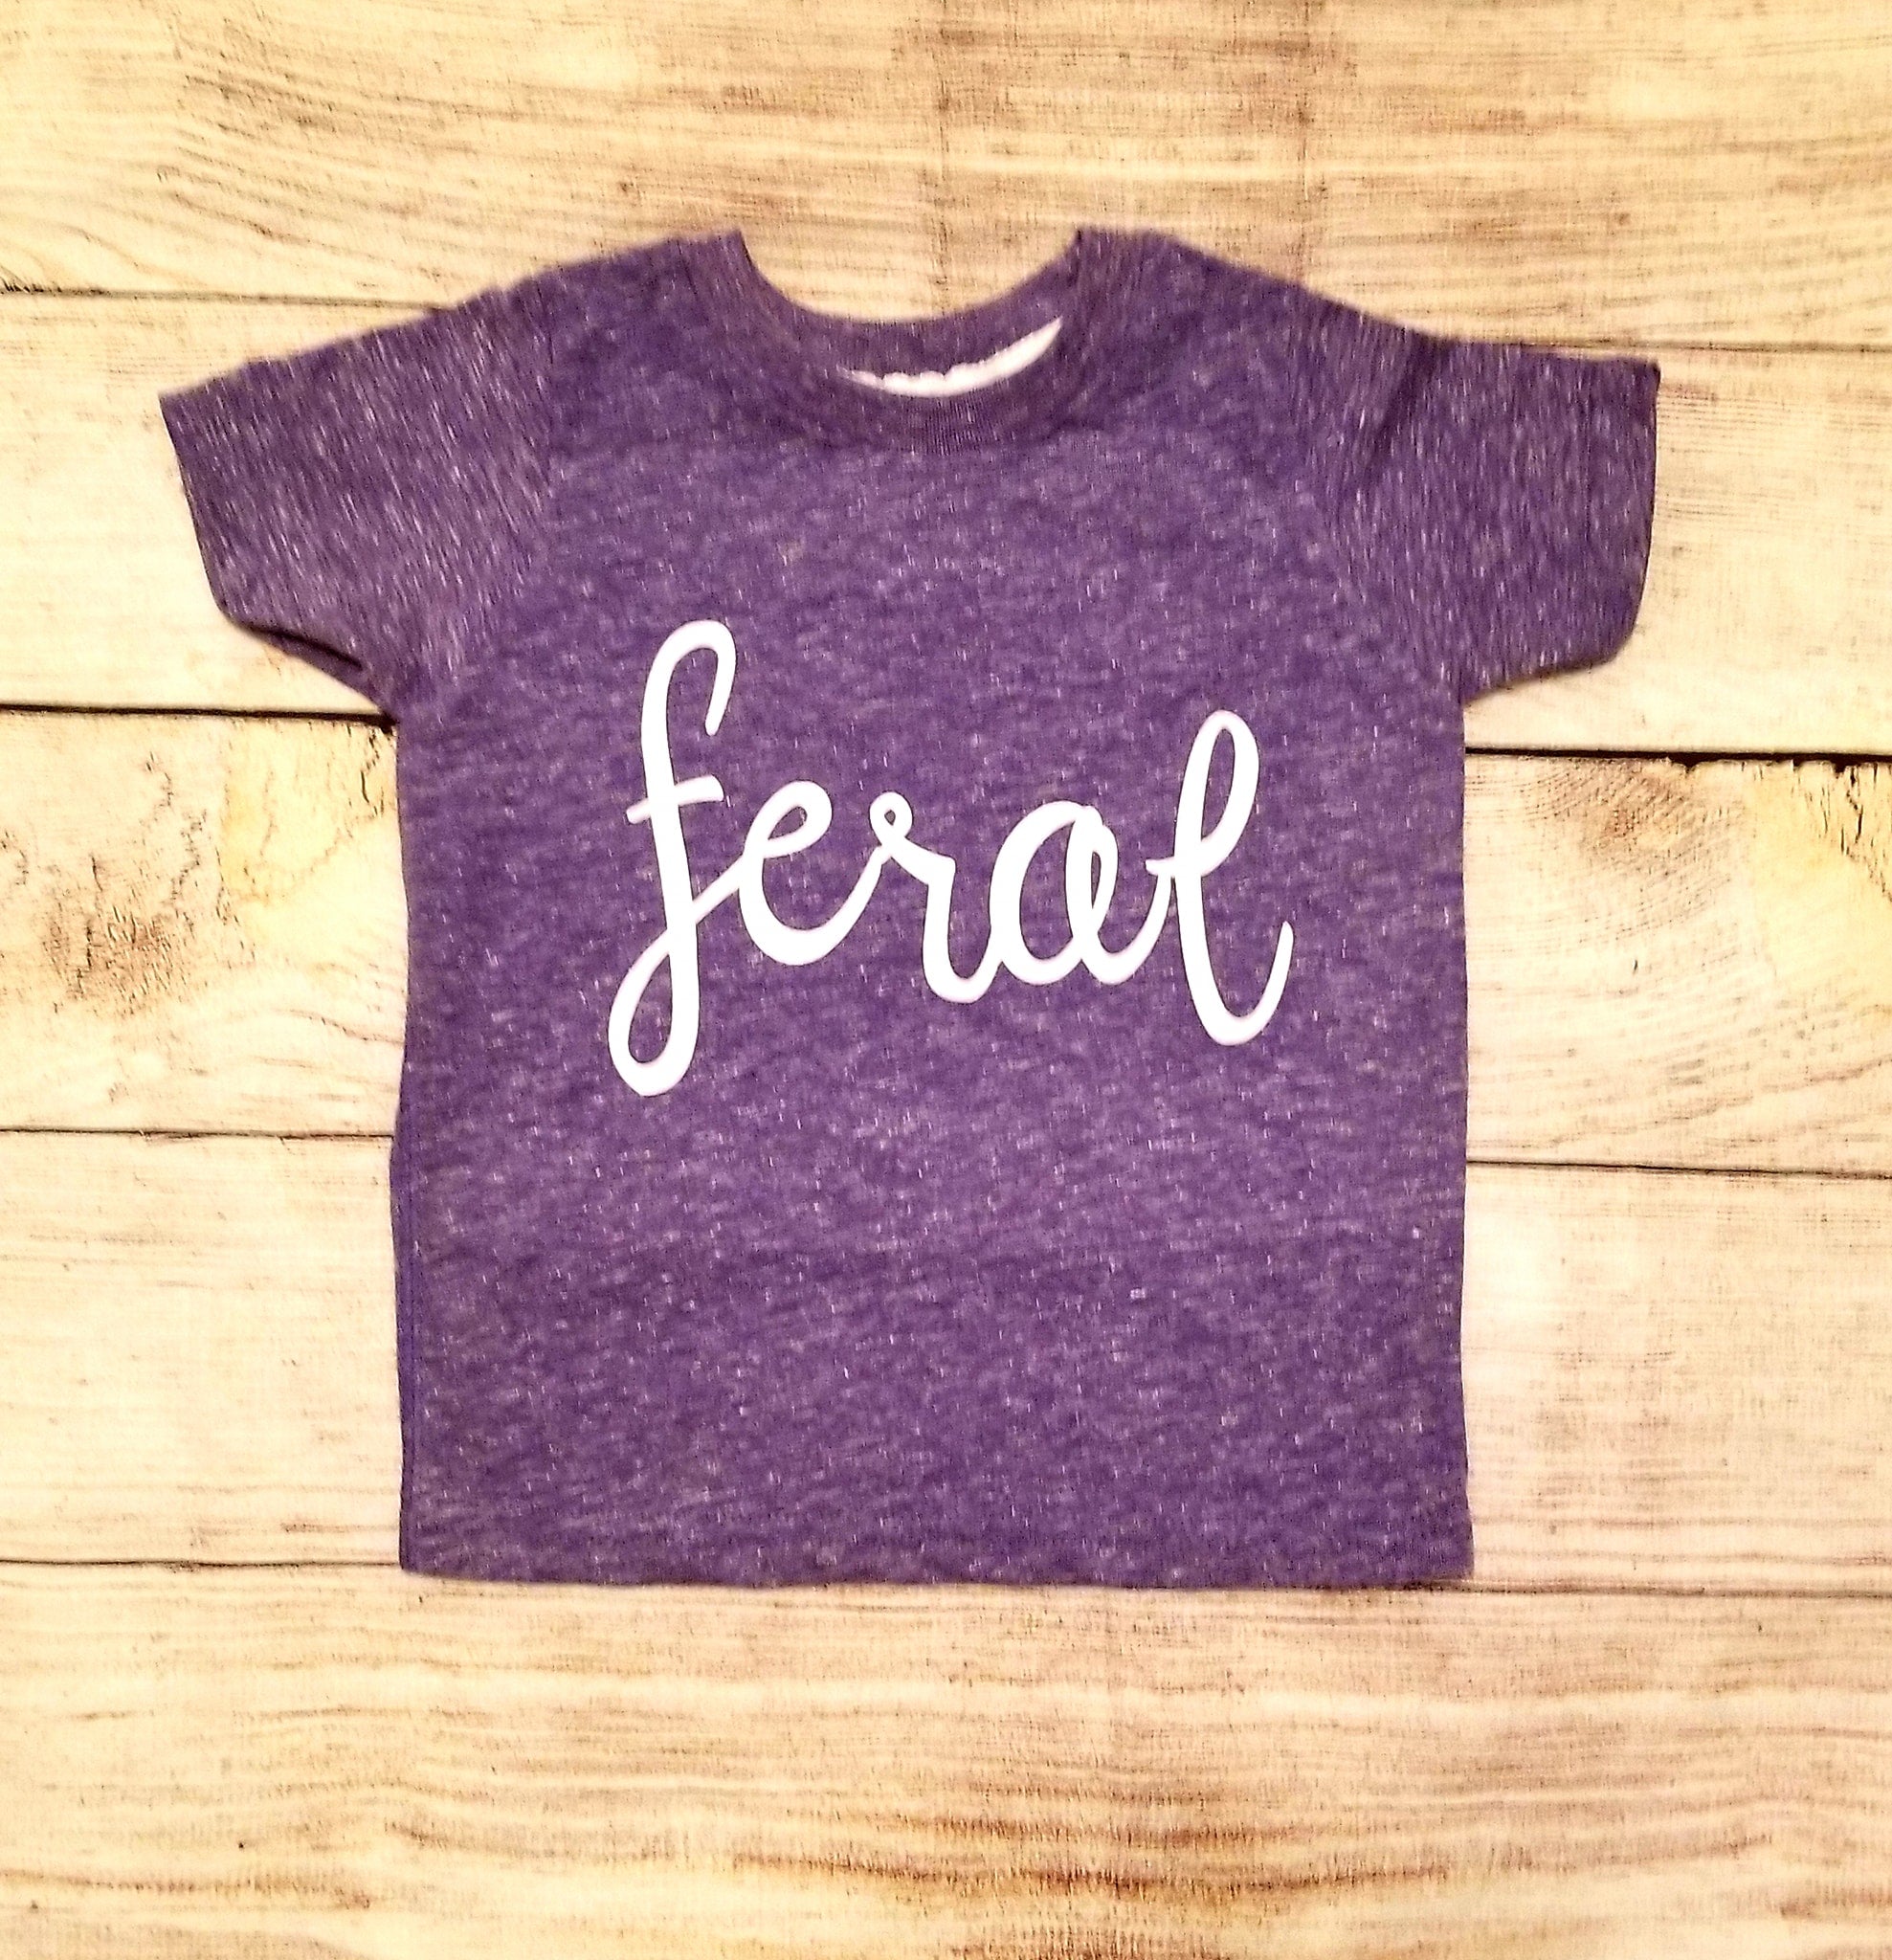 feral toddler tee